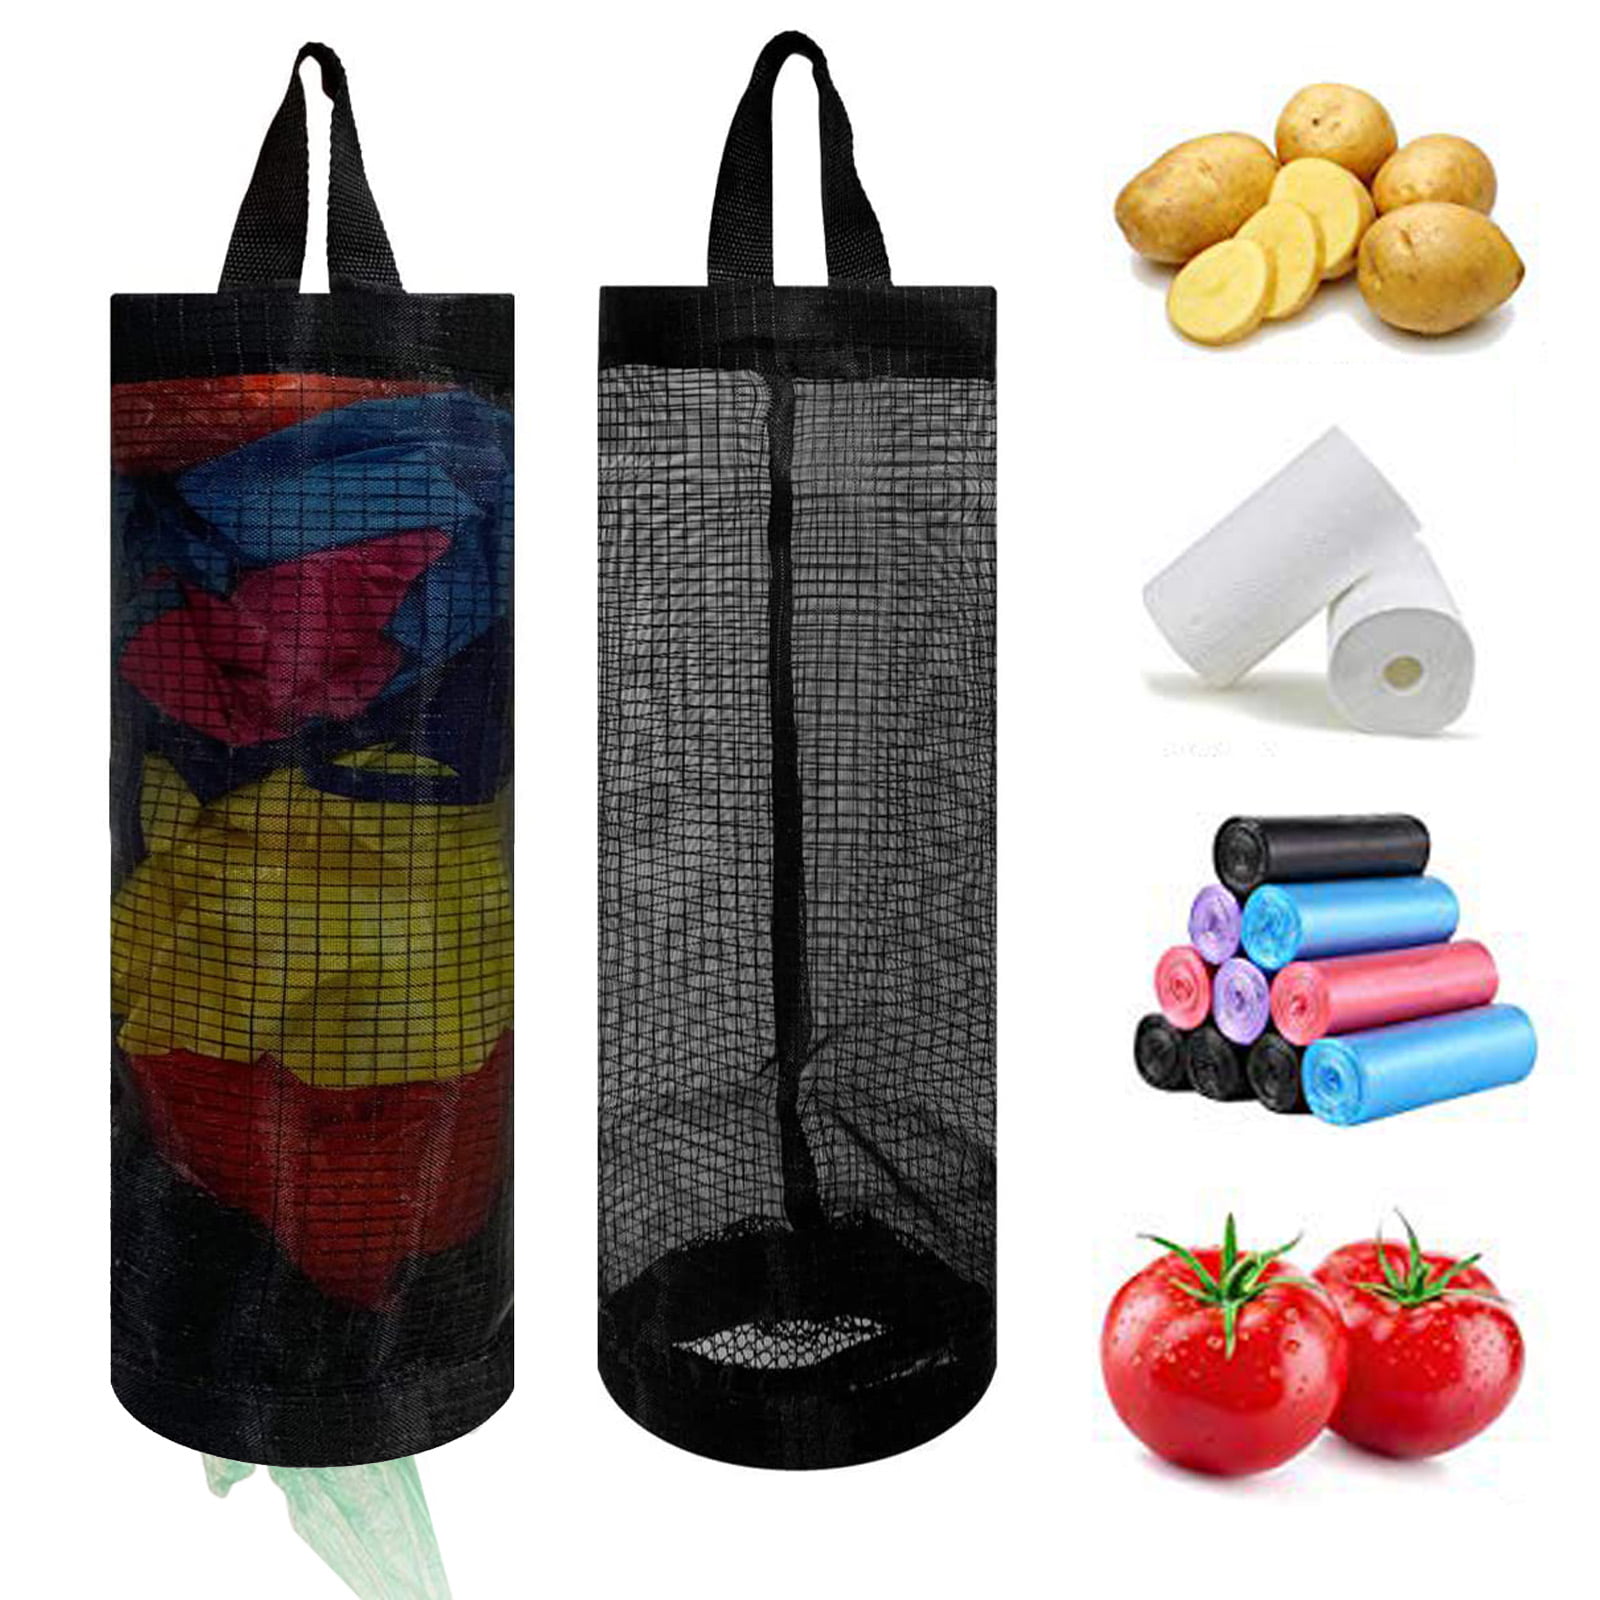 Plastic bag holder and dispenser/Grocery bag organizer/Grocery shopping bag storage/carrier/kitchen organizer/Handmade in the USA 